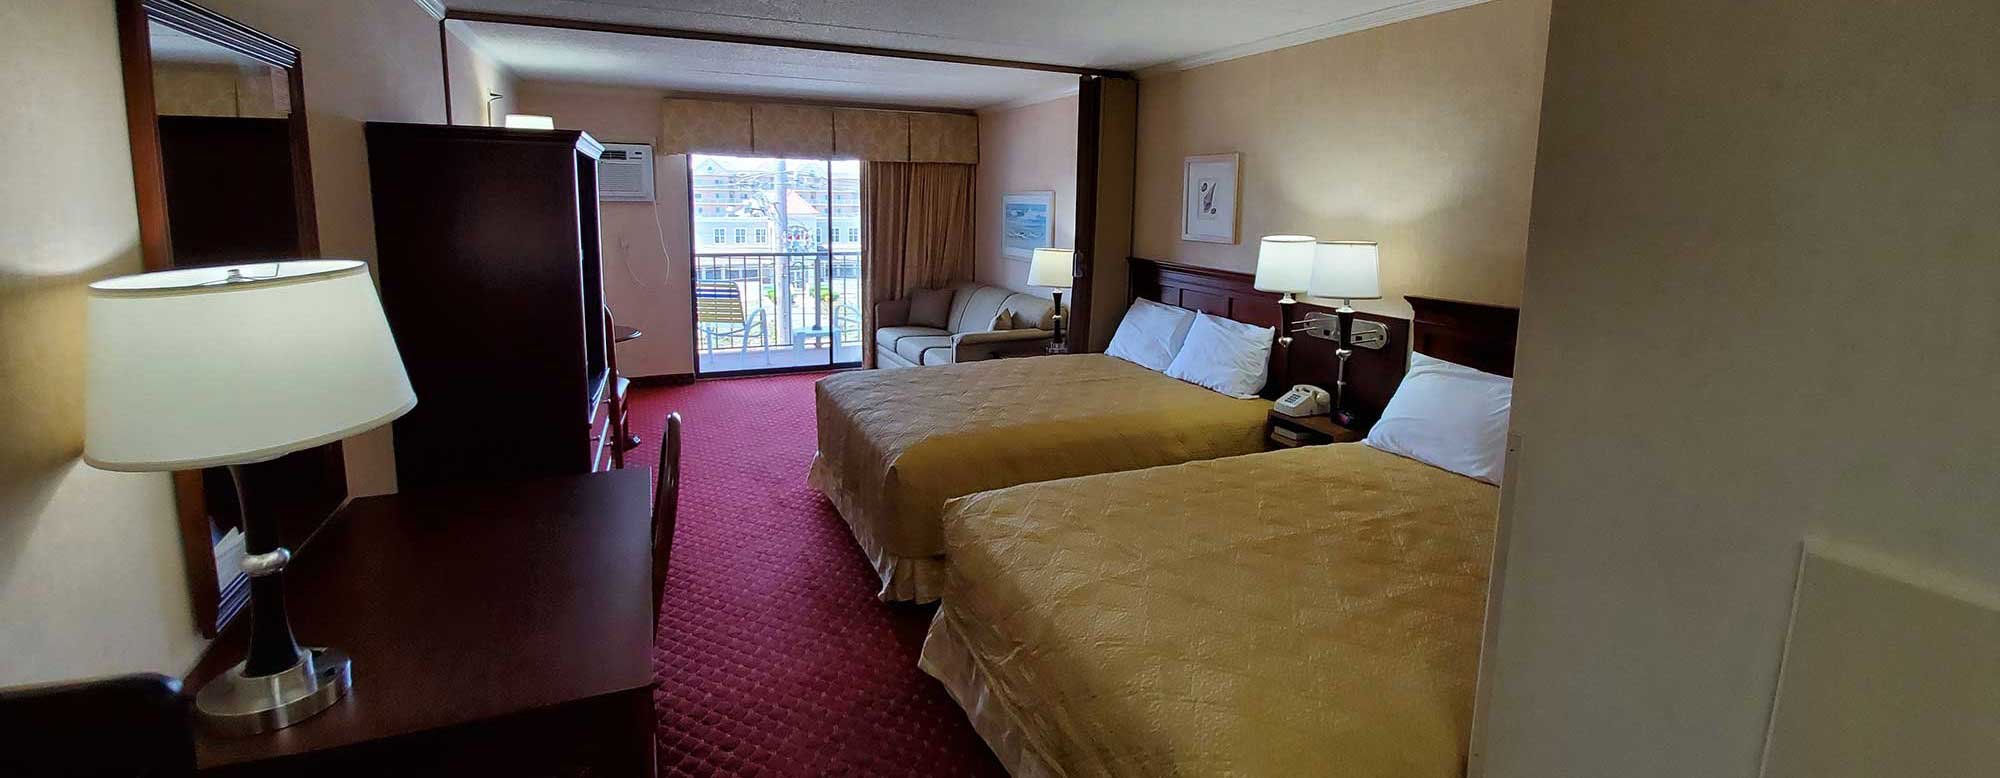 Motel room with two queen beds, dresser and balcony